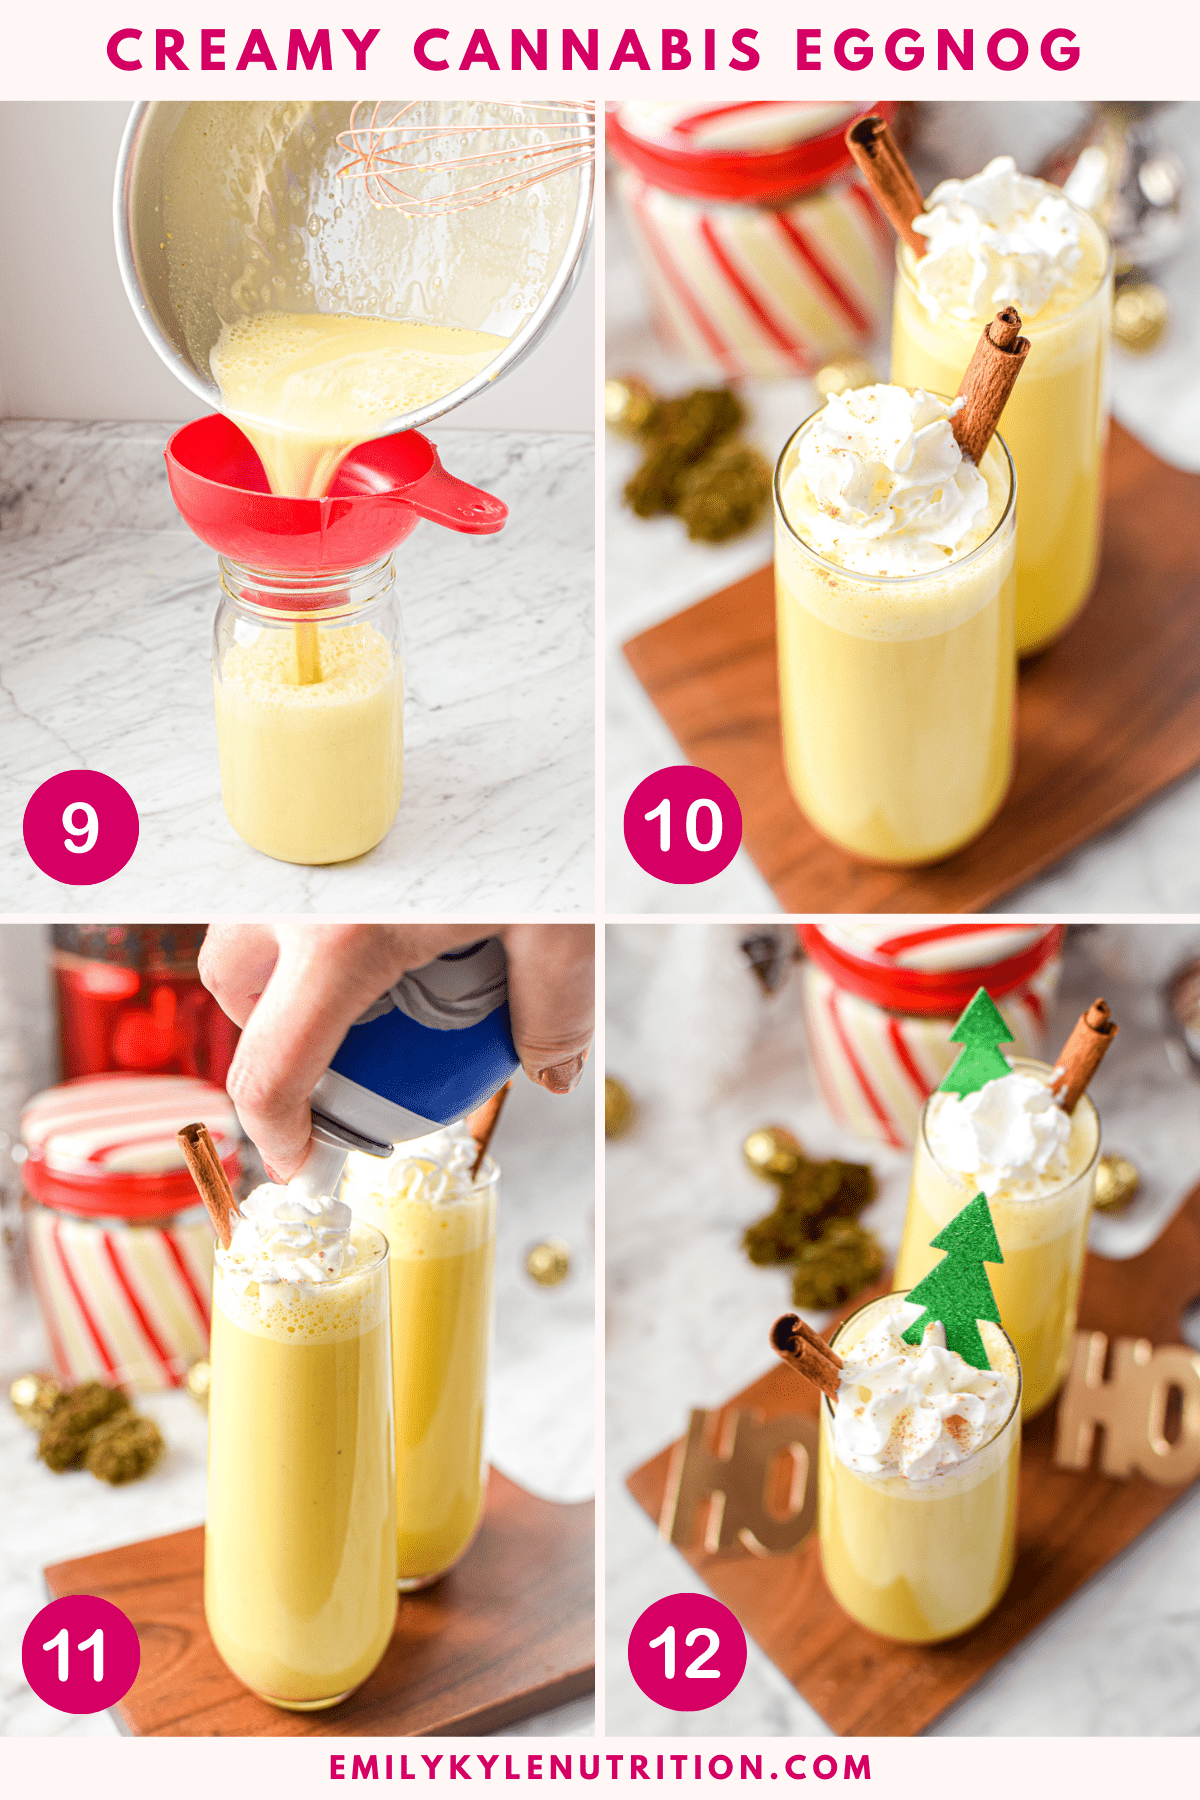 A four step image collage showing the steps to make cannabis eggnog